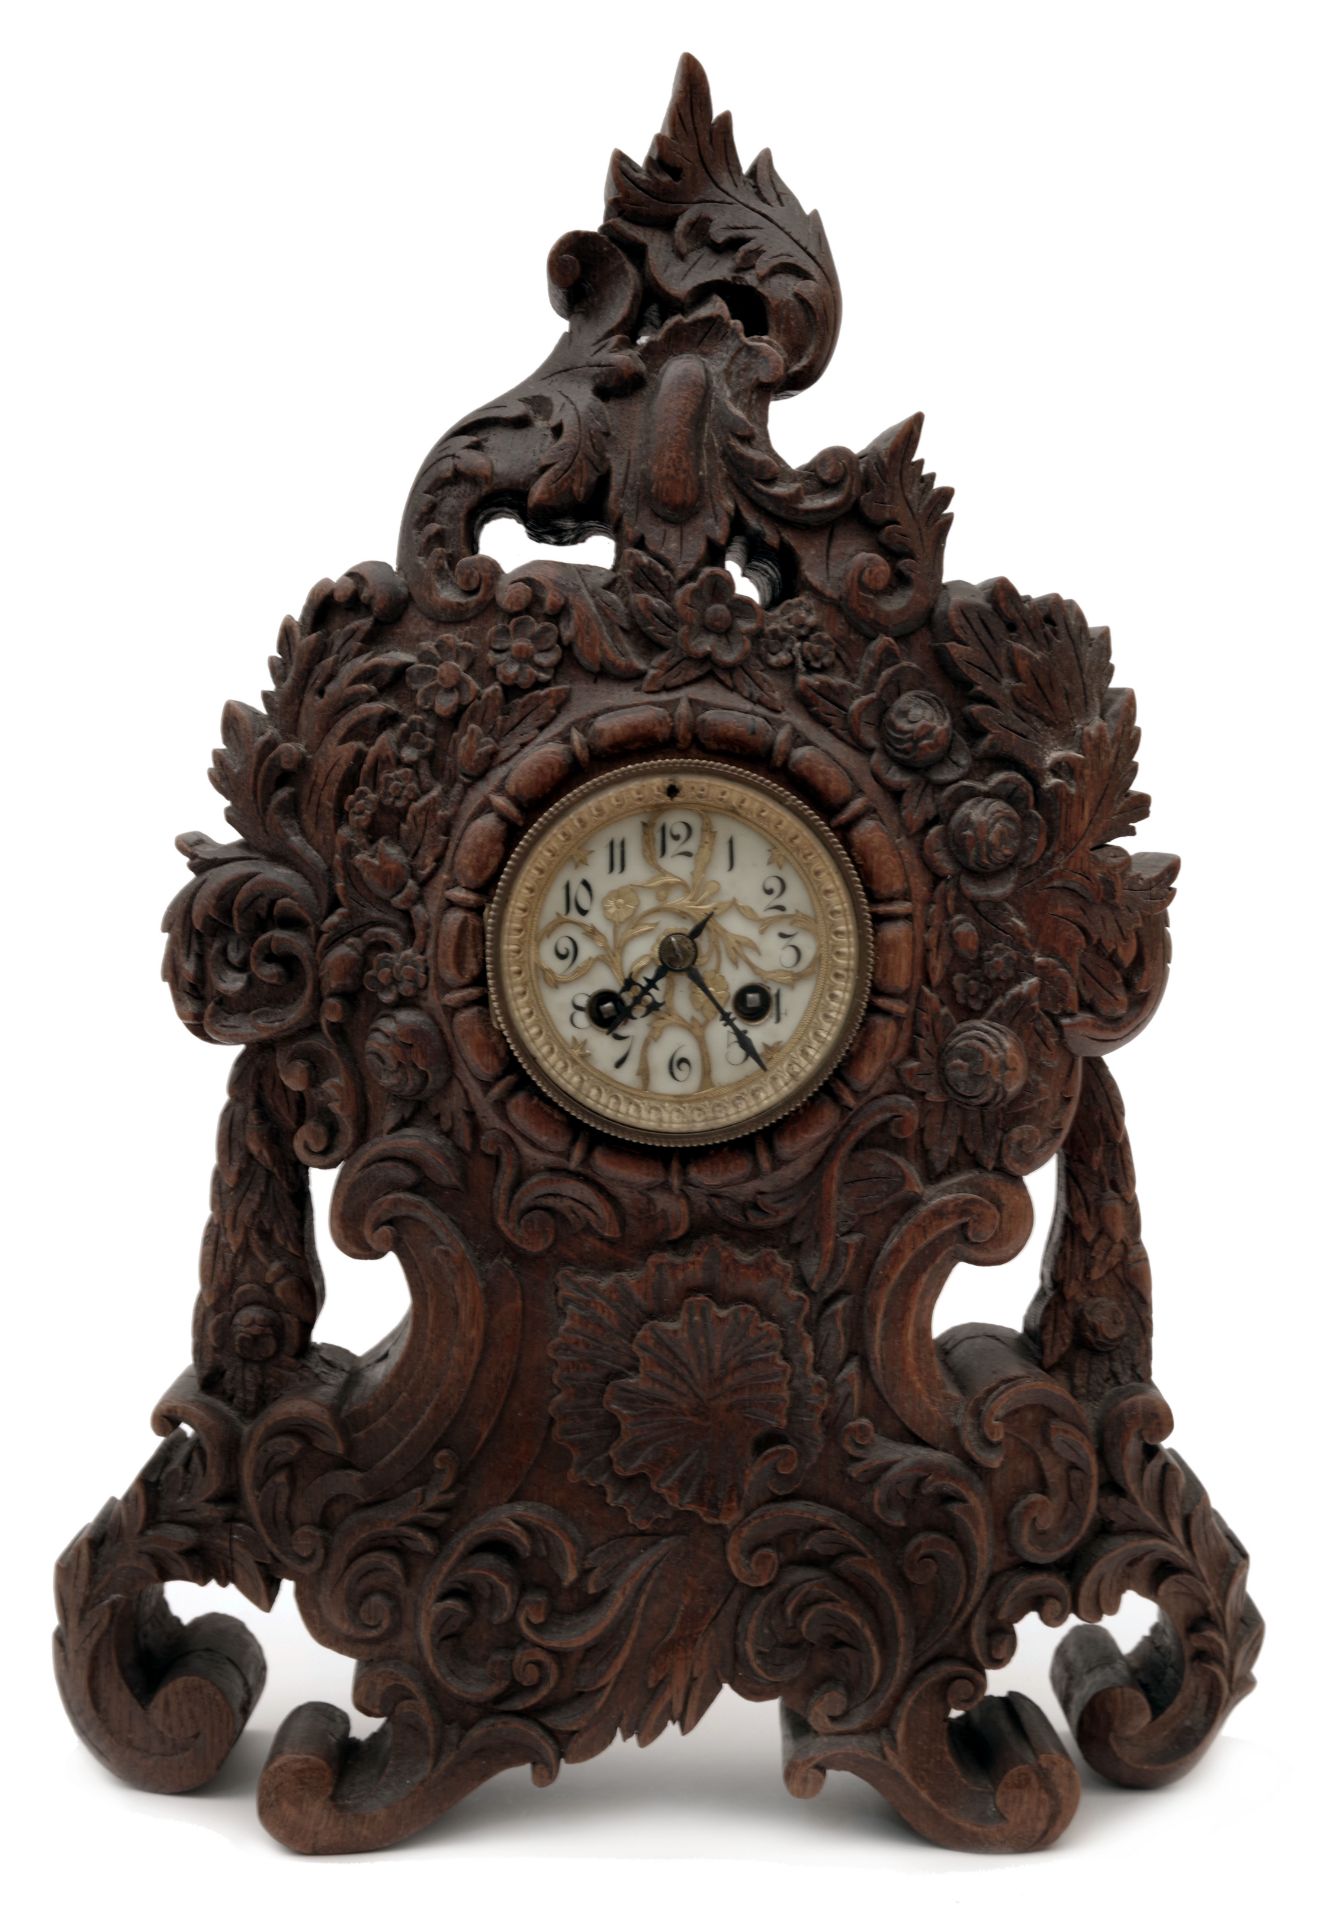 A French Rococo Style Mantel Clock